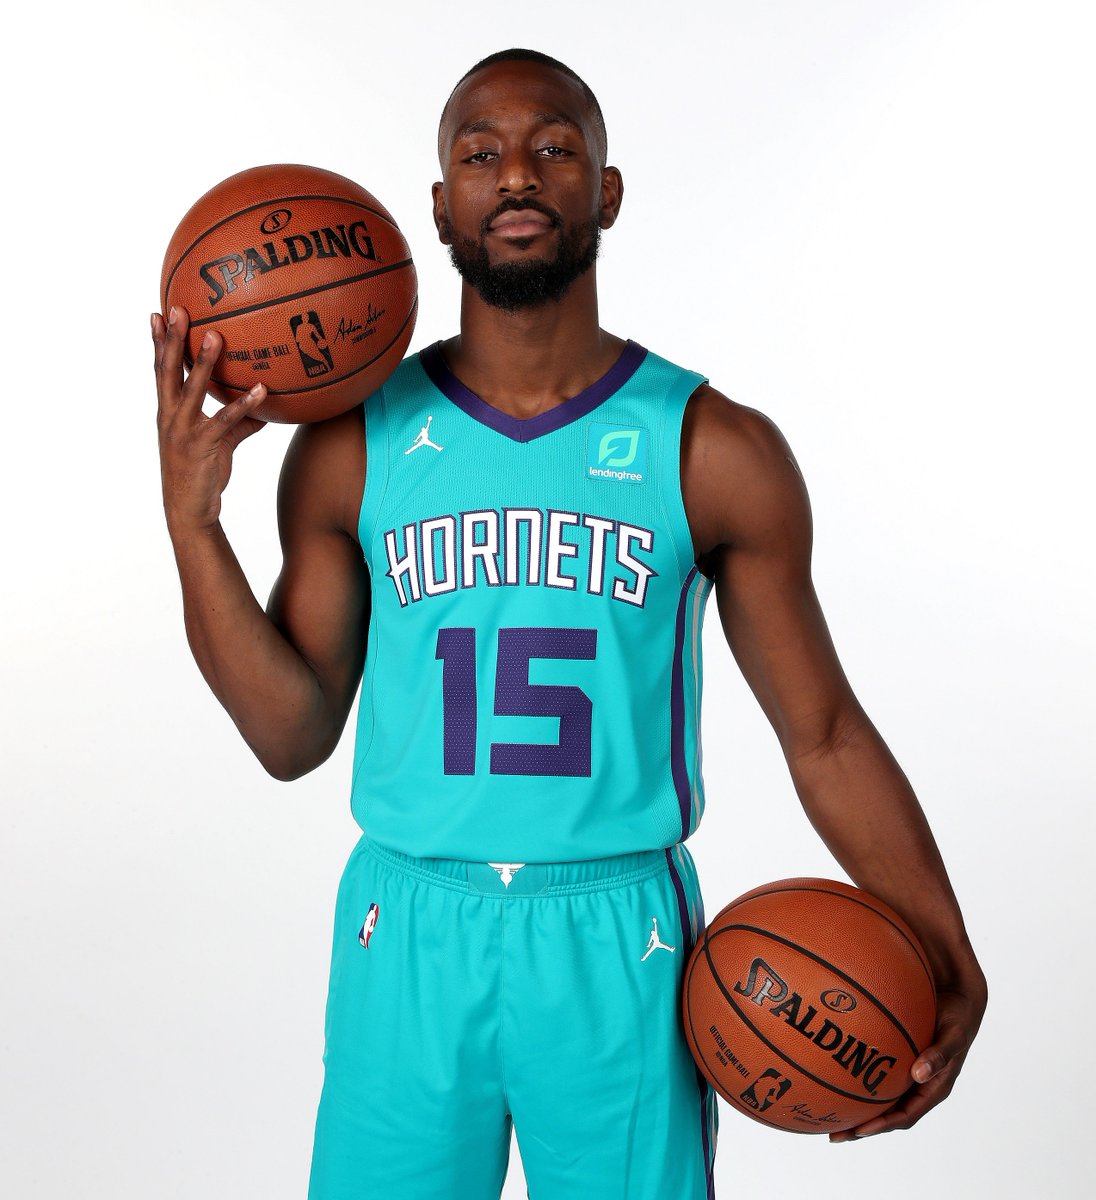 Join us in wishing @KembaWalker of the @hornets a HAPPY 29th BIRTHDAY! 

#NBABDAY #Hornets30